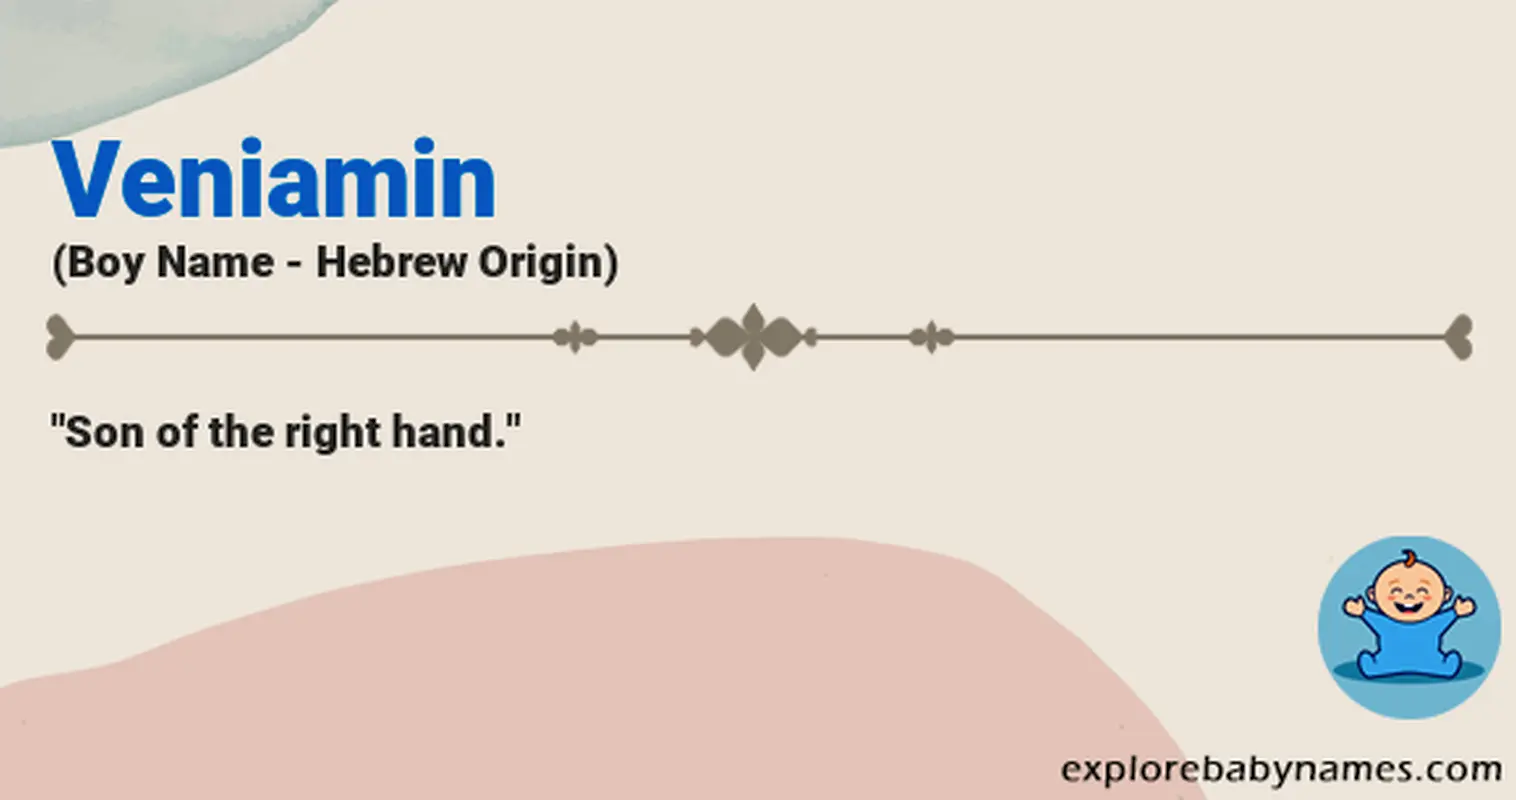 Meaning of Veniamin